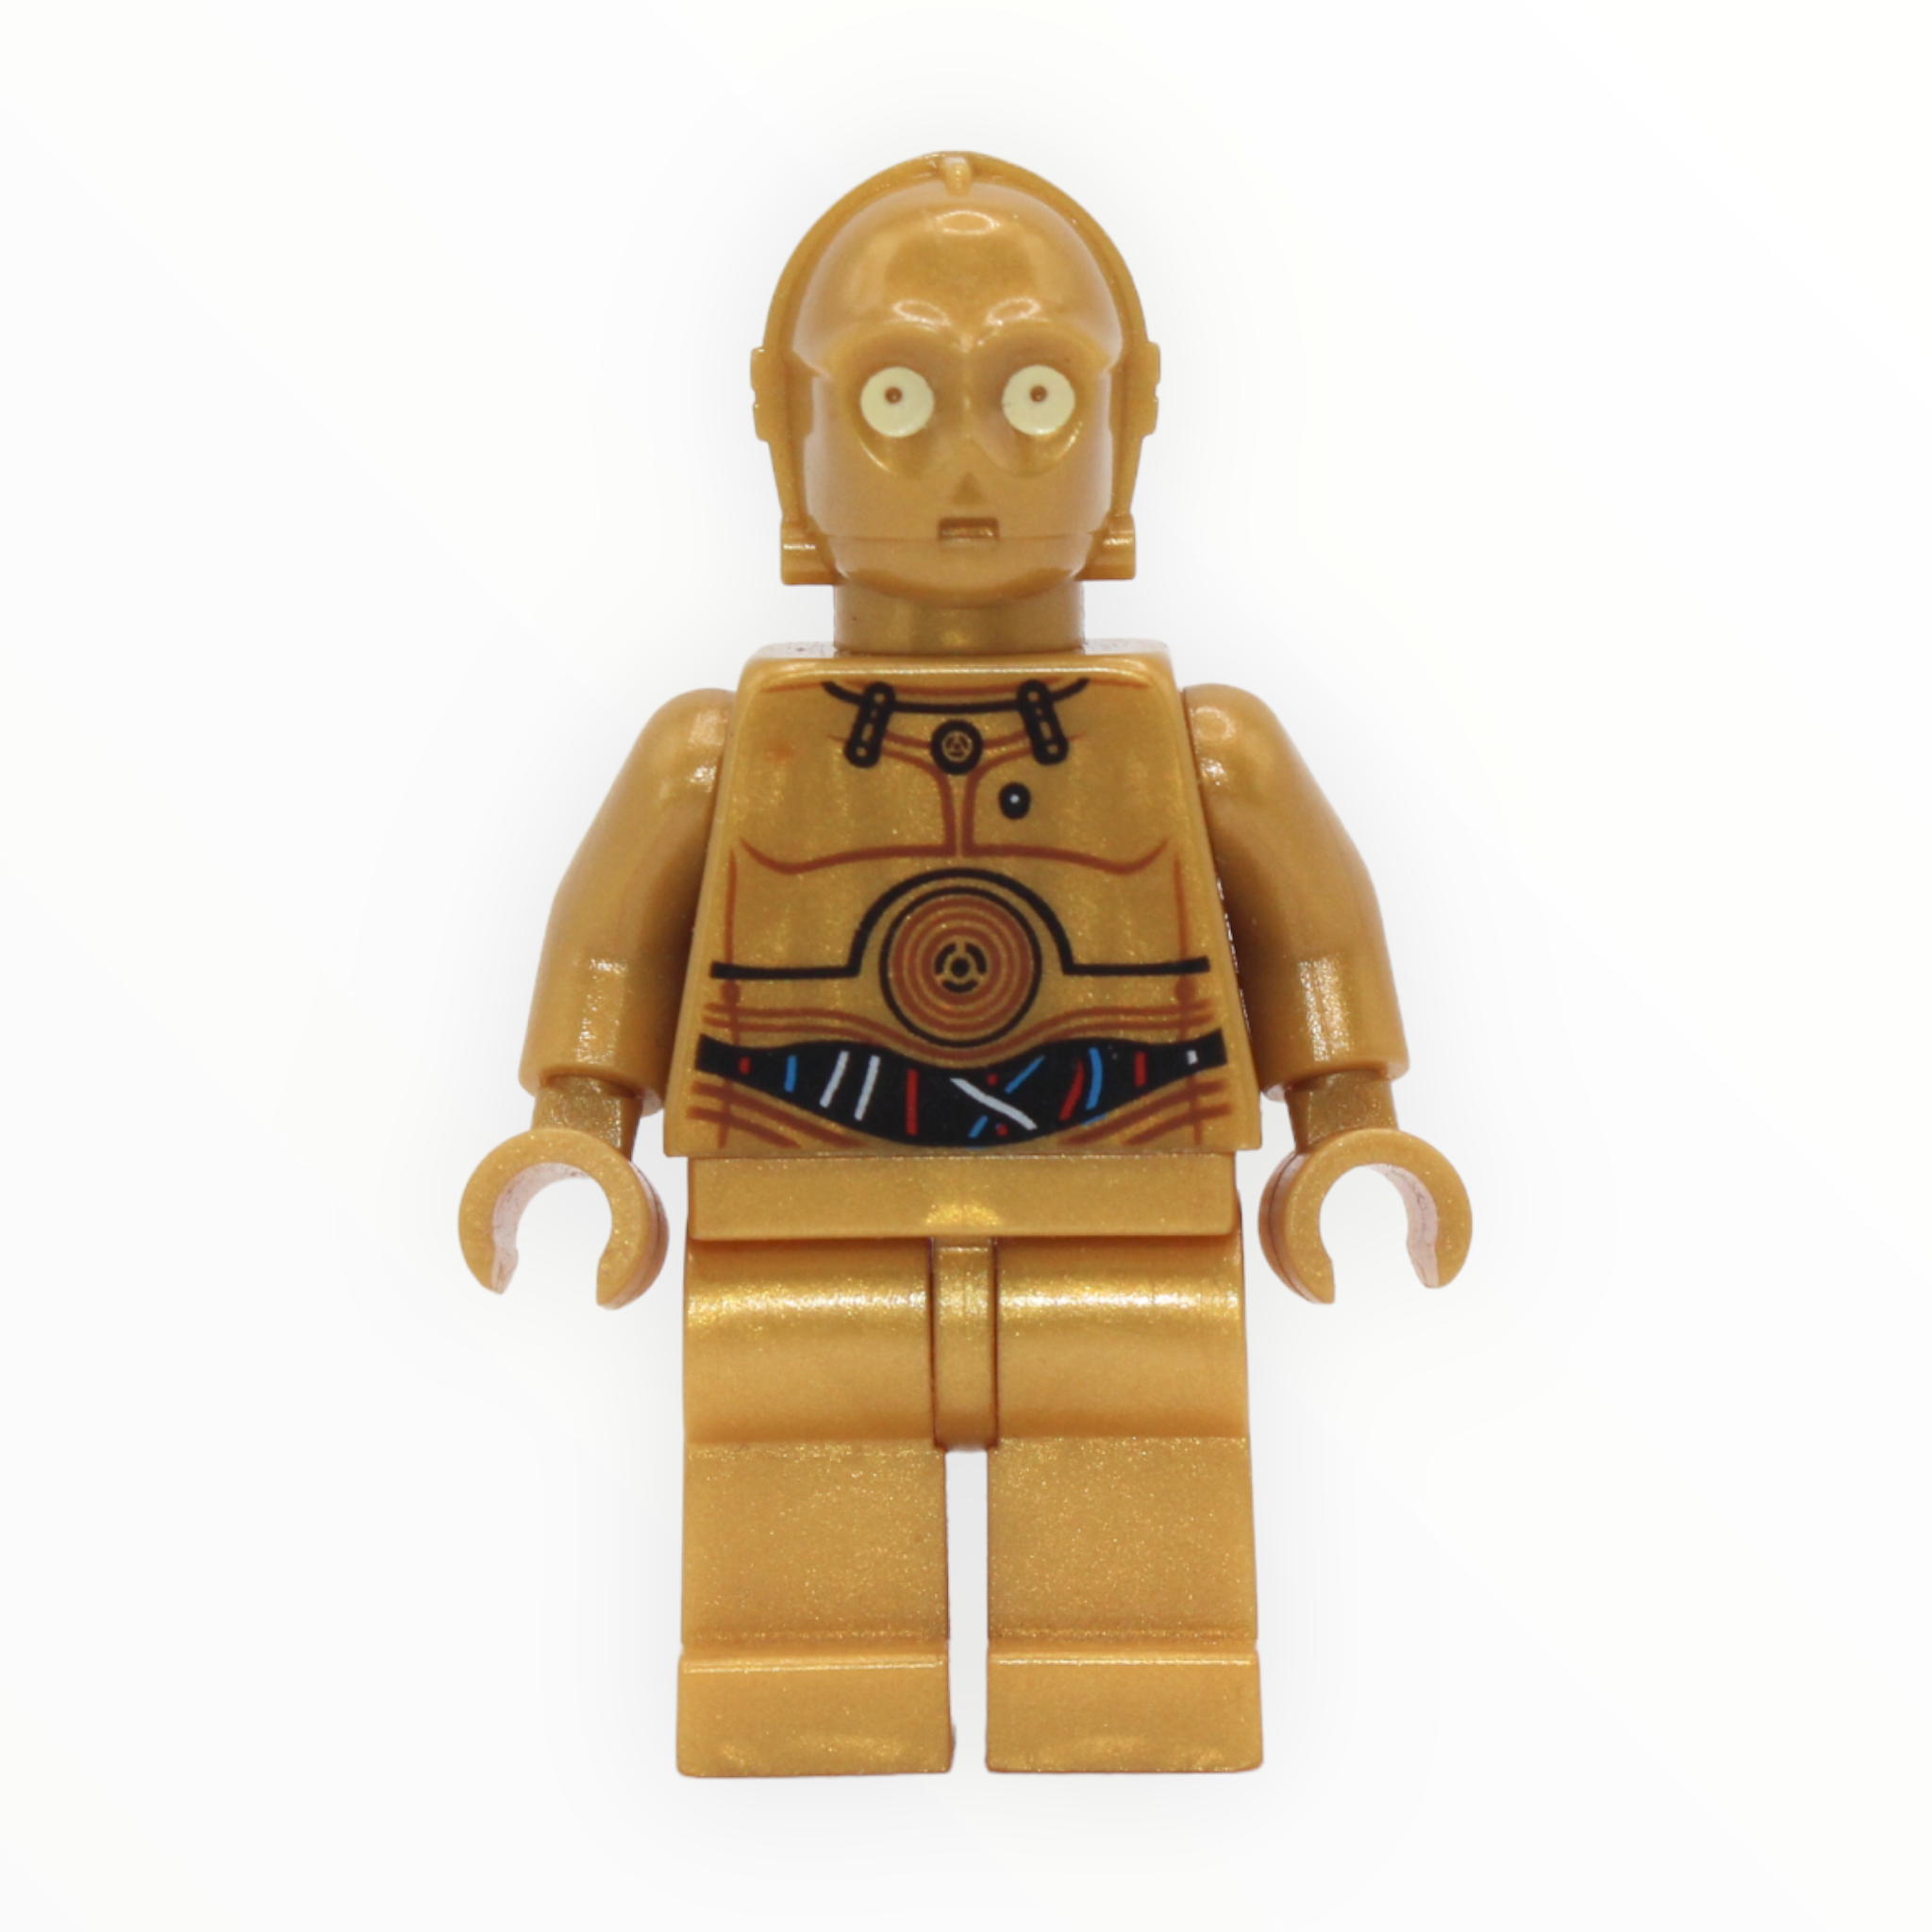 C-3PO (colorful wires, 2012)